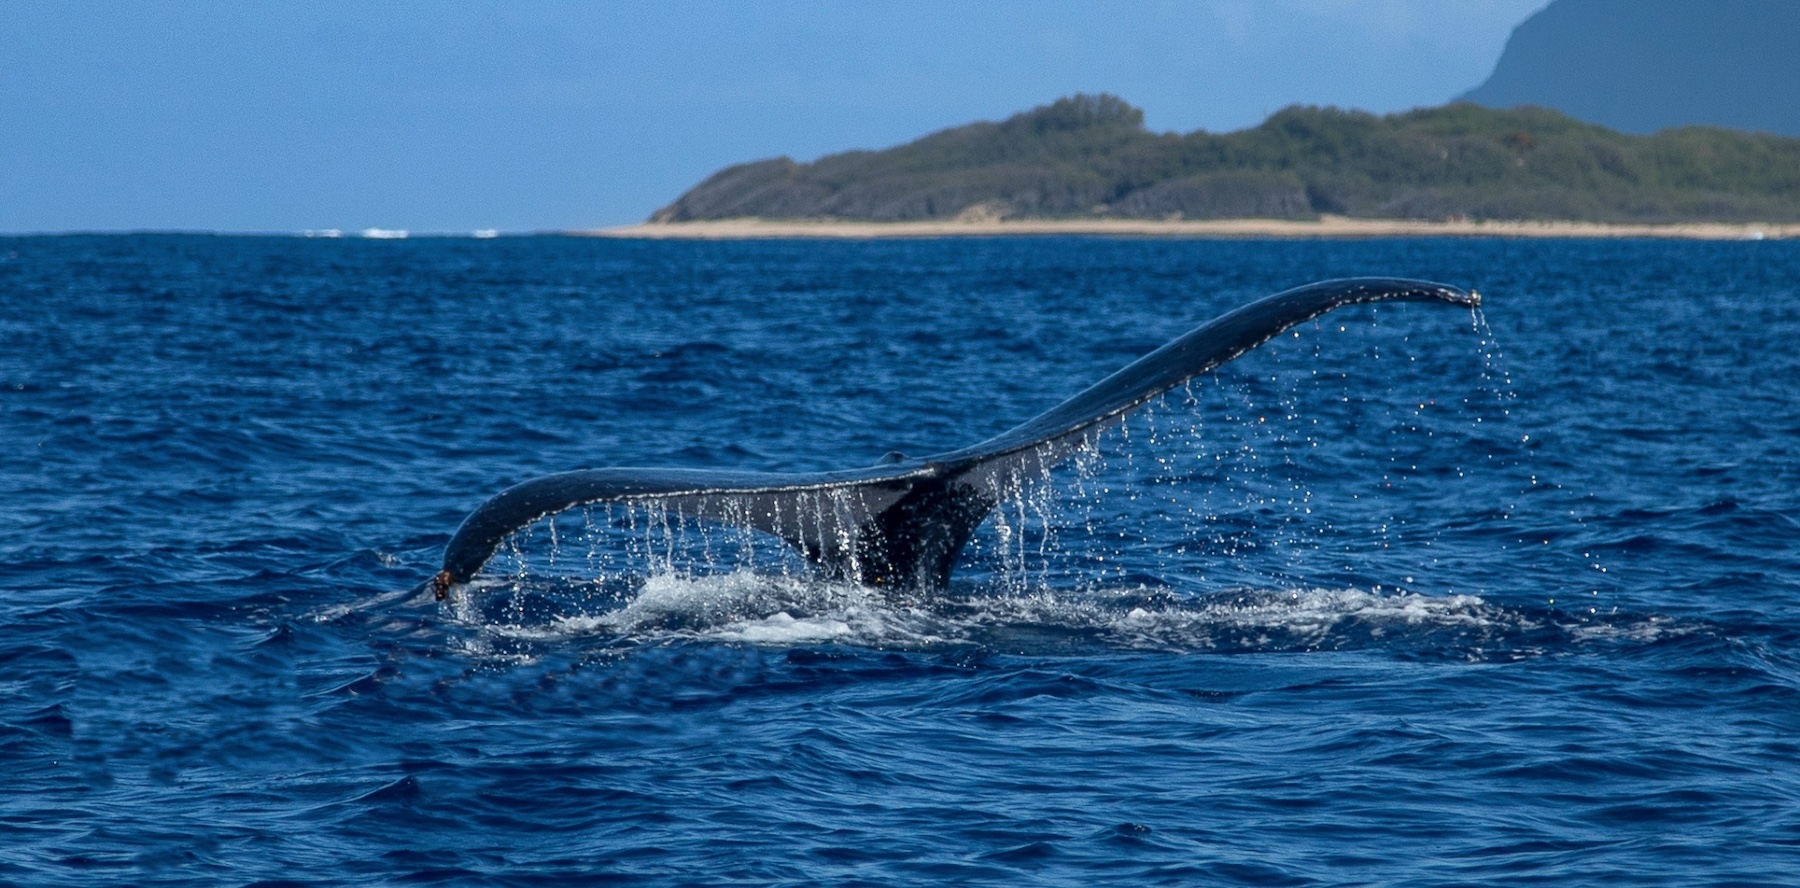 Whale tail emerging from the ocean, with water droplets cascading off the tail and a scenic shoreline in the background